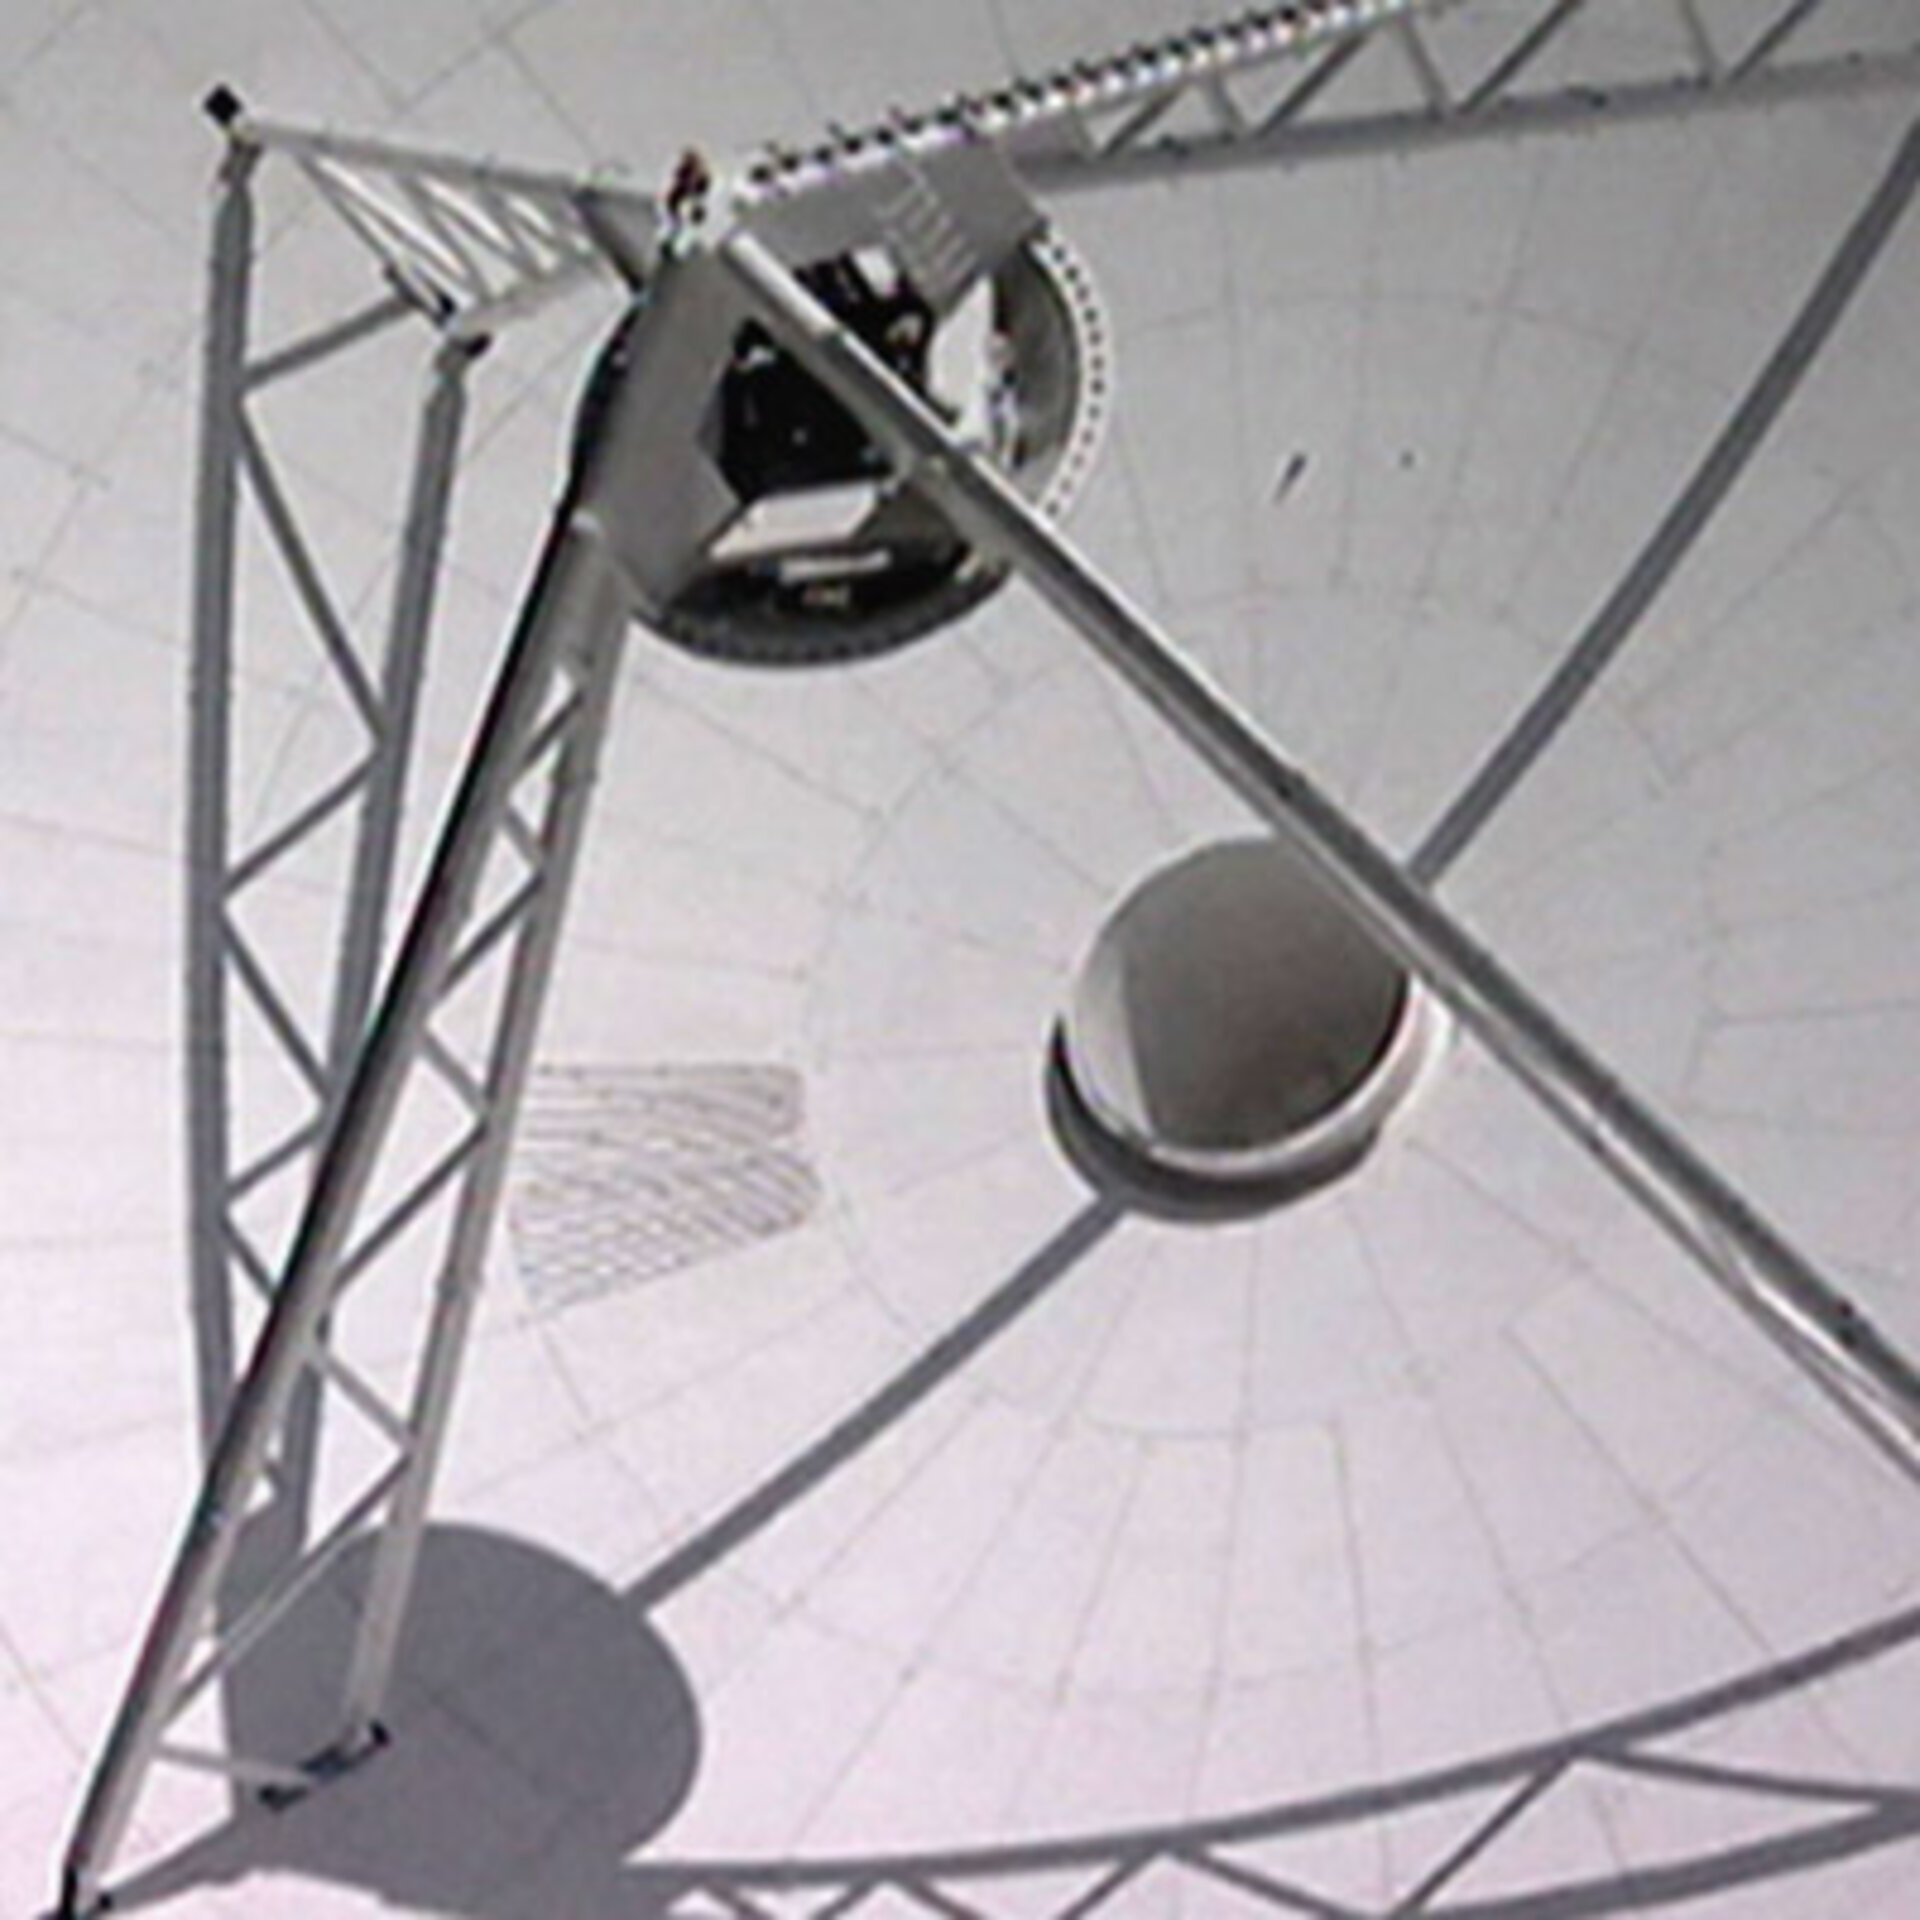 All the science data from Venus Express will be  arriving via this giant dish antenna